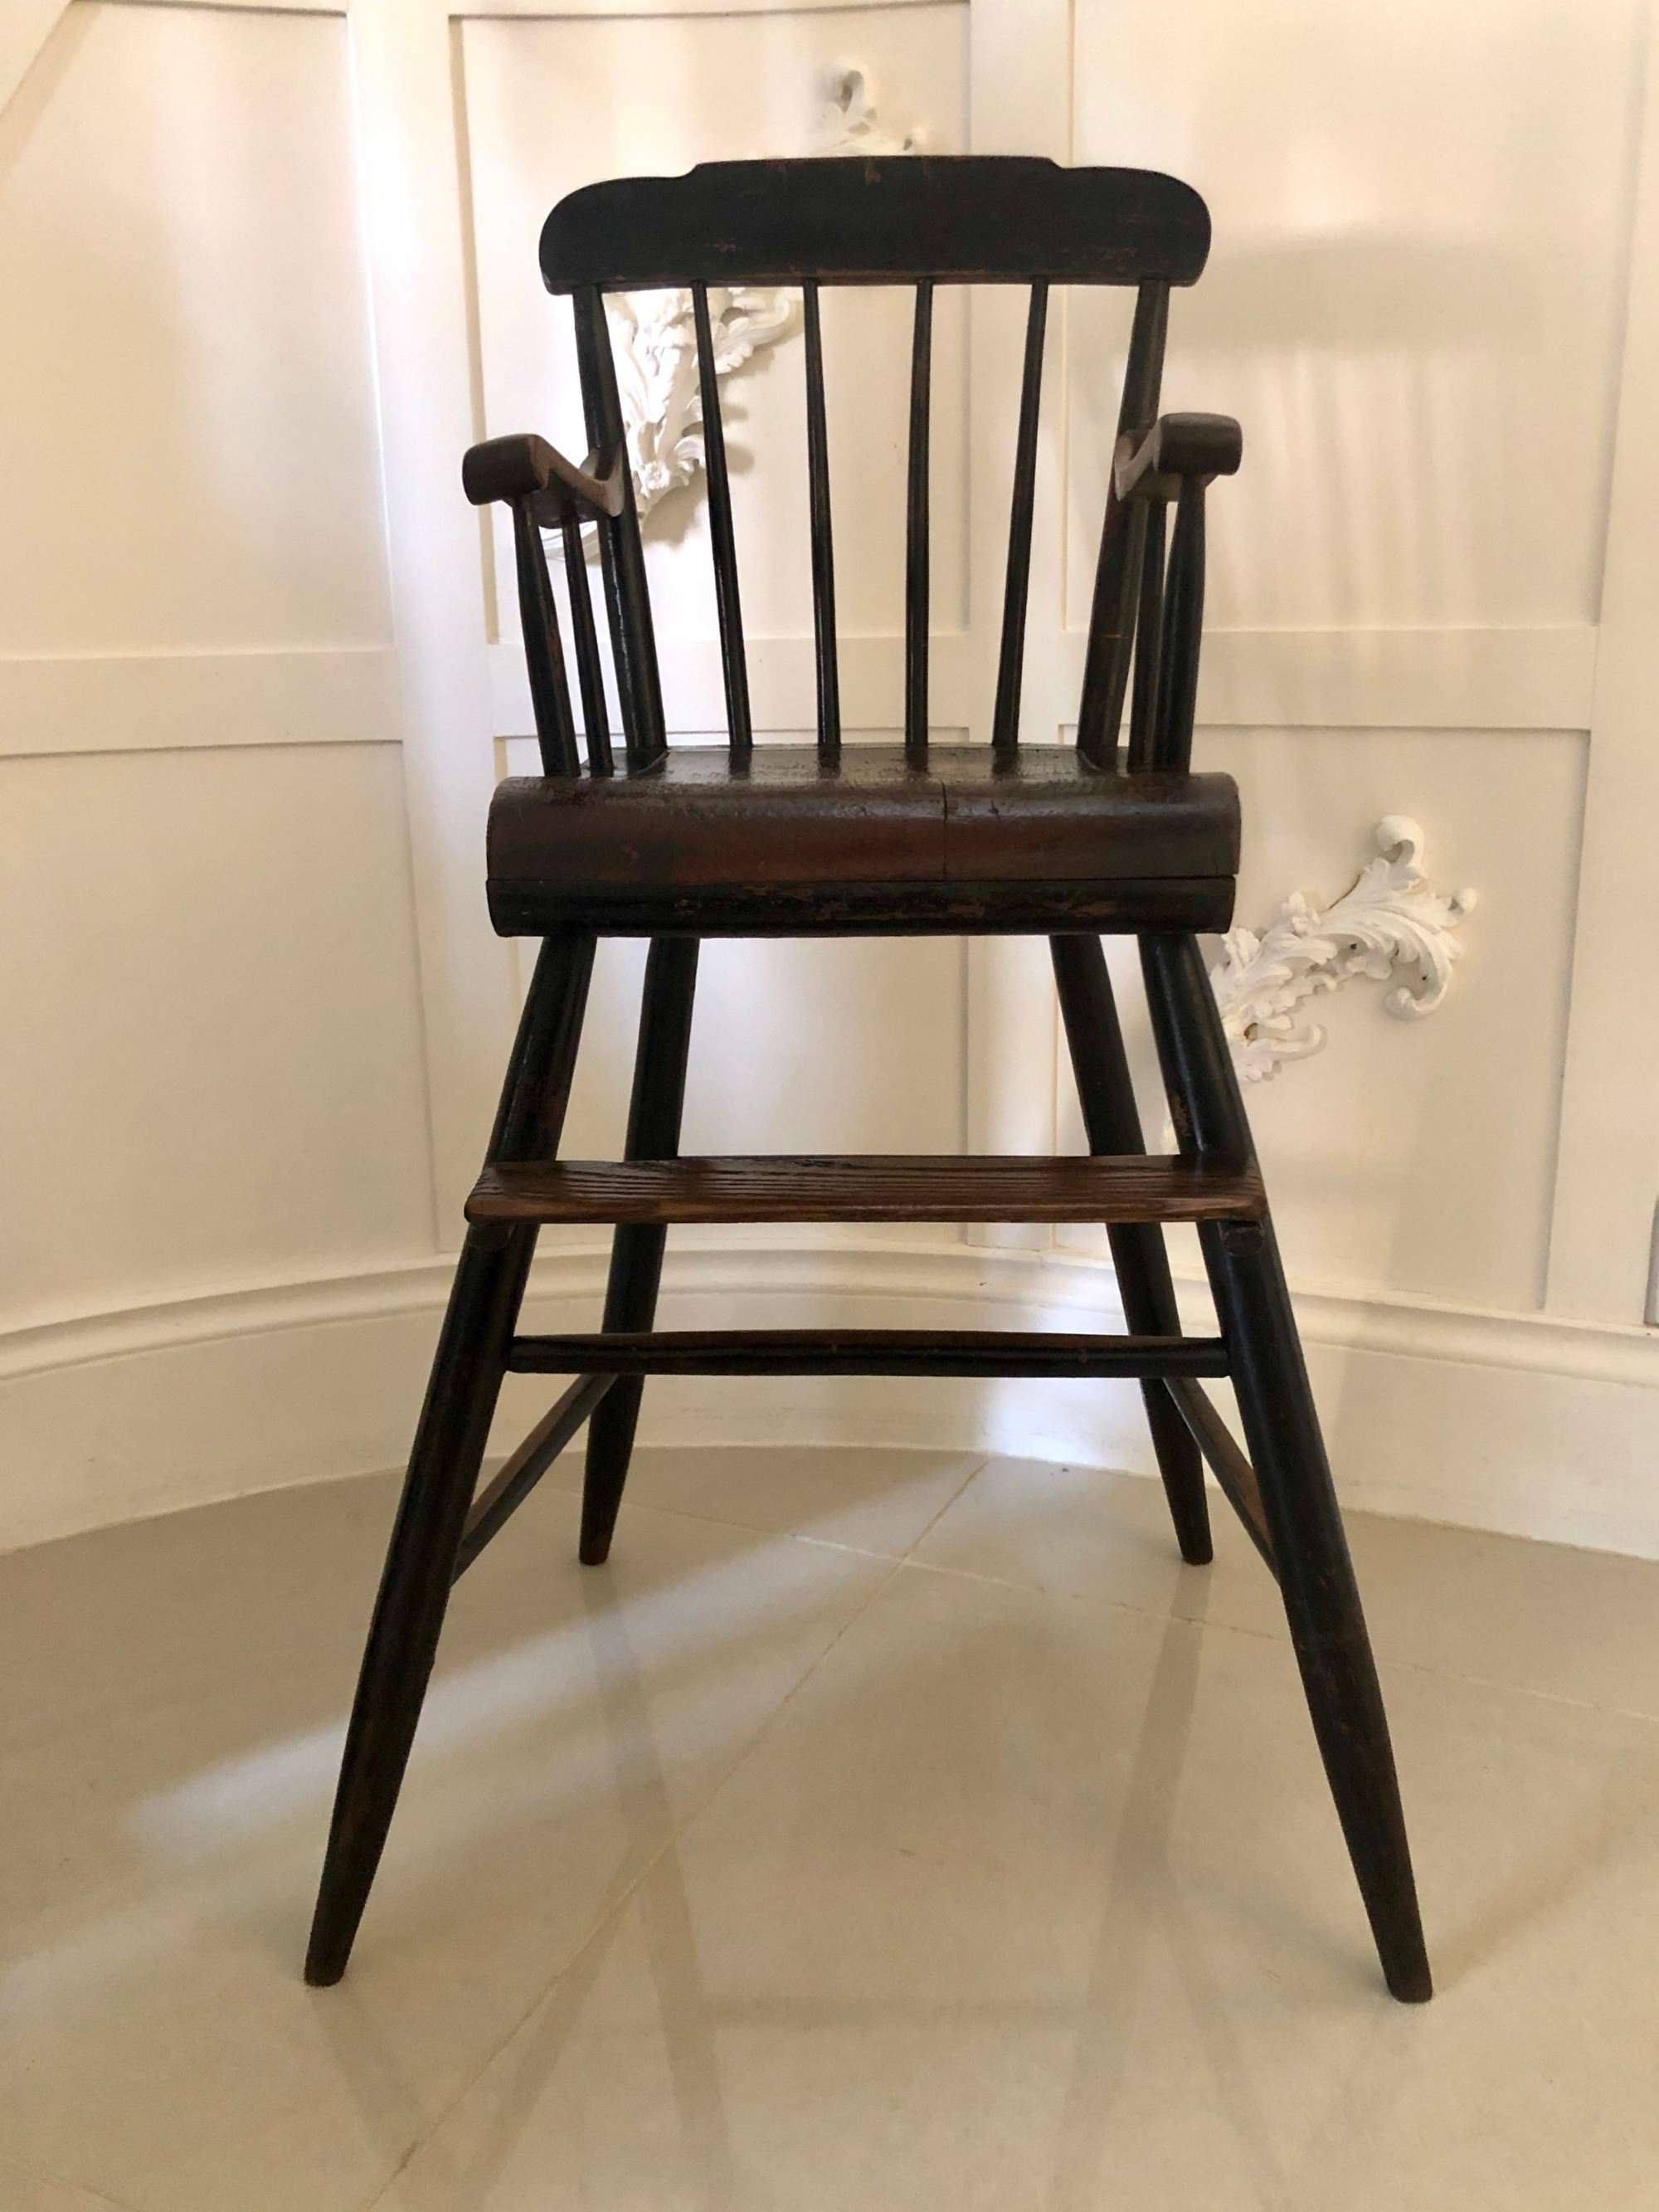 Unusual Antique Baby's High Chair